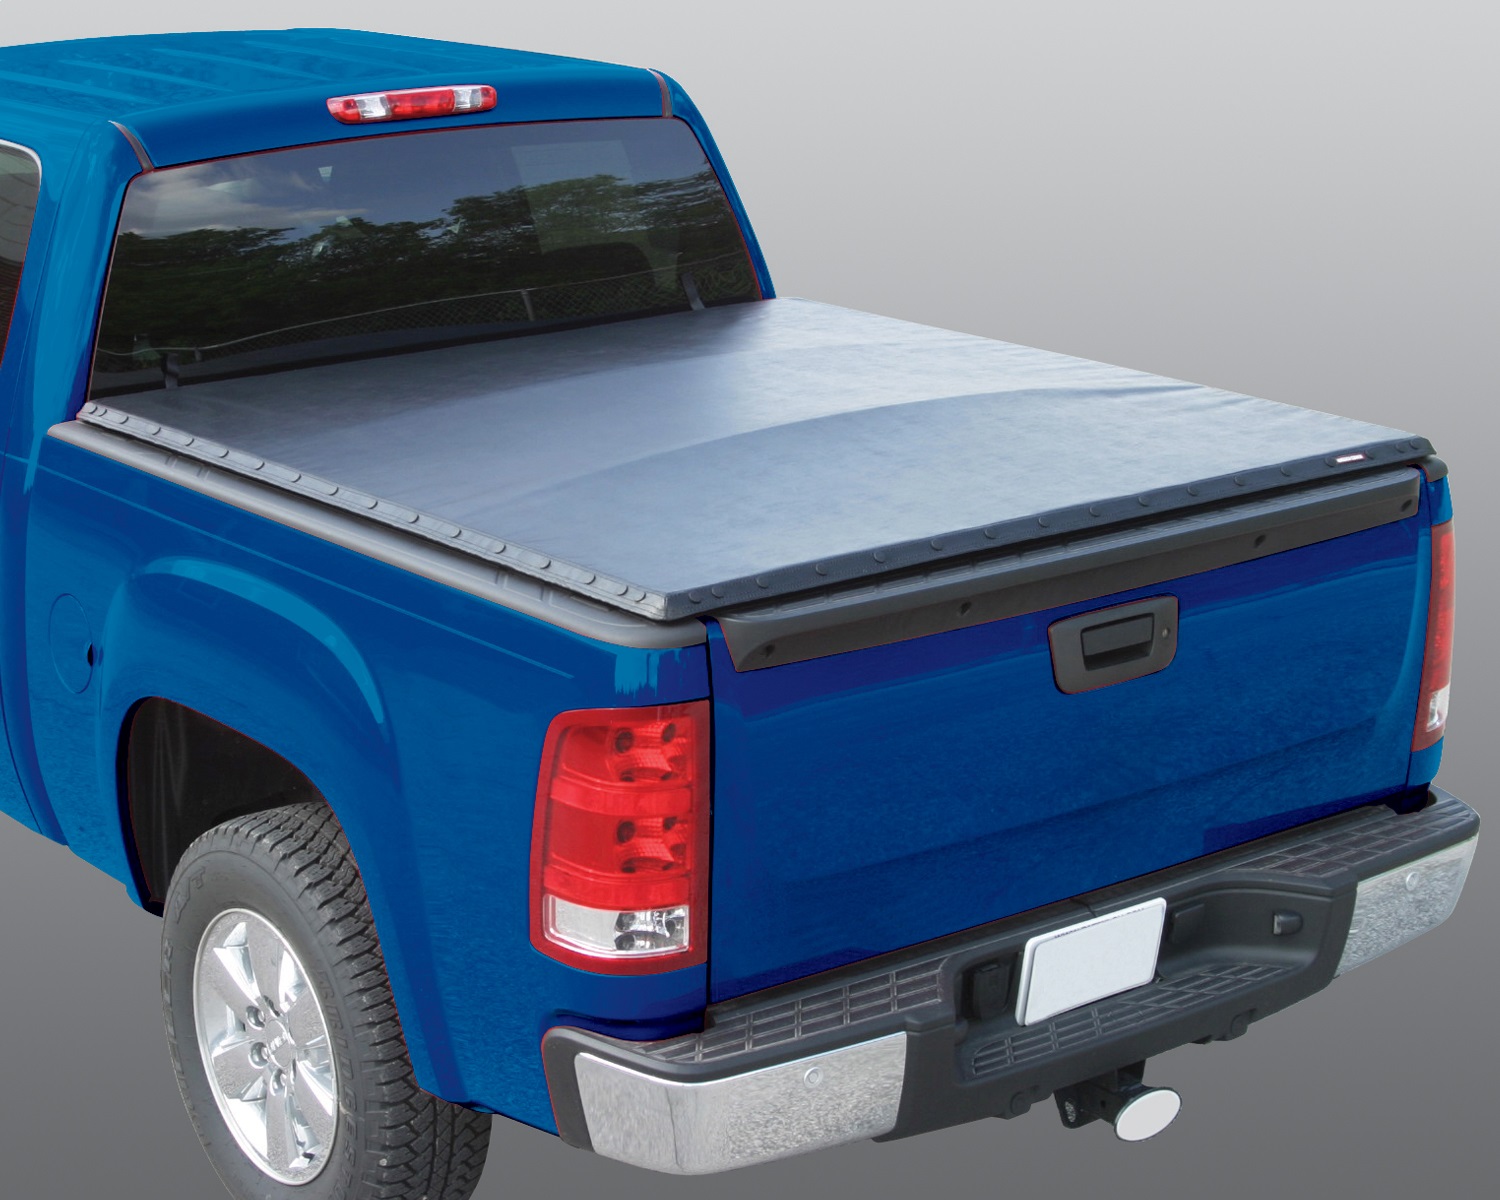 Rugged Liner Rugged Liner SN-T605 Rugged Cover; Tonneau Cover Fits 05-13 Tacoma